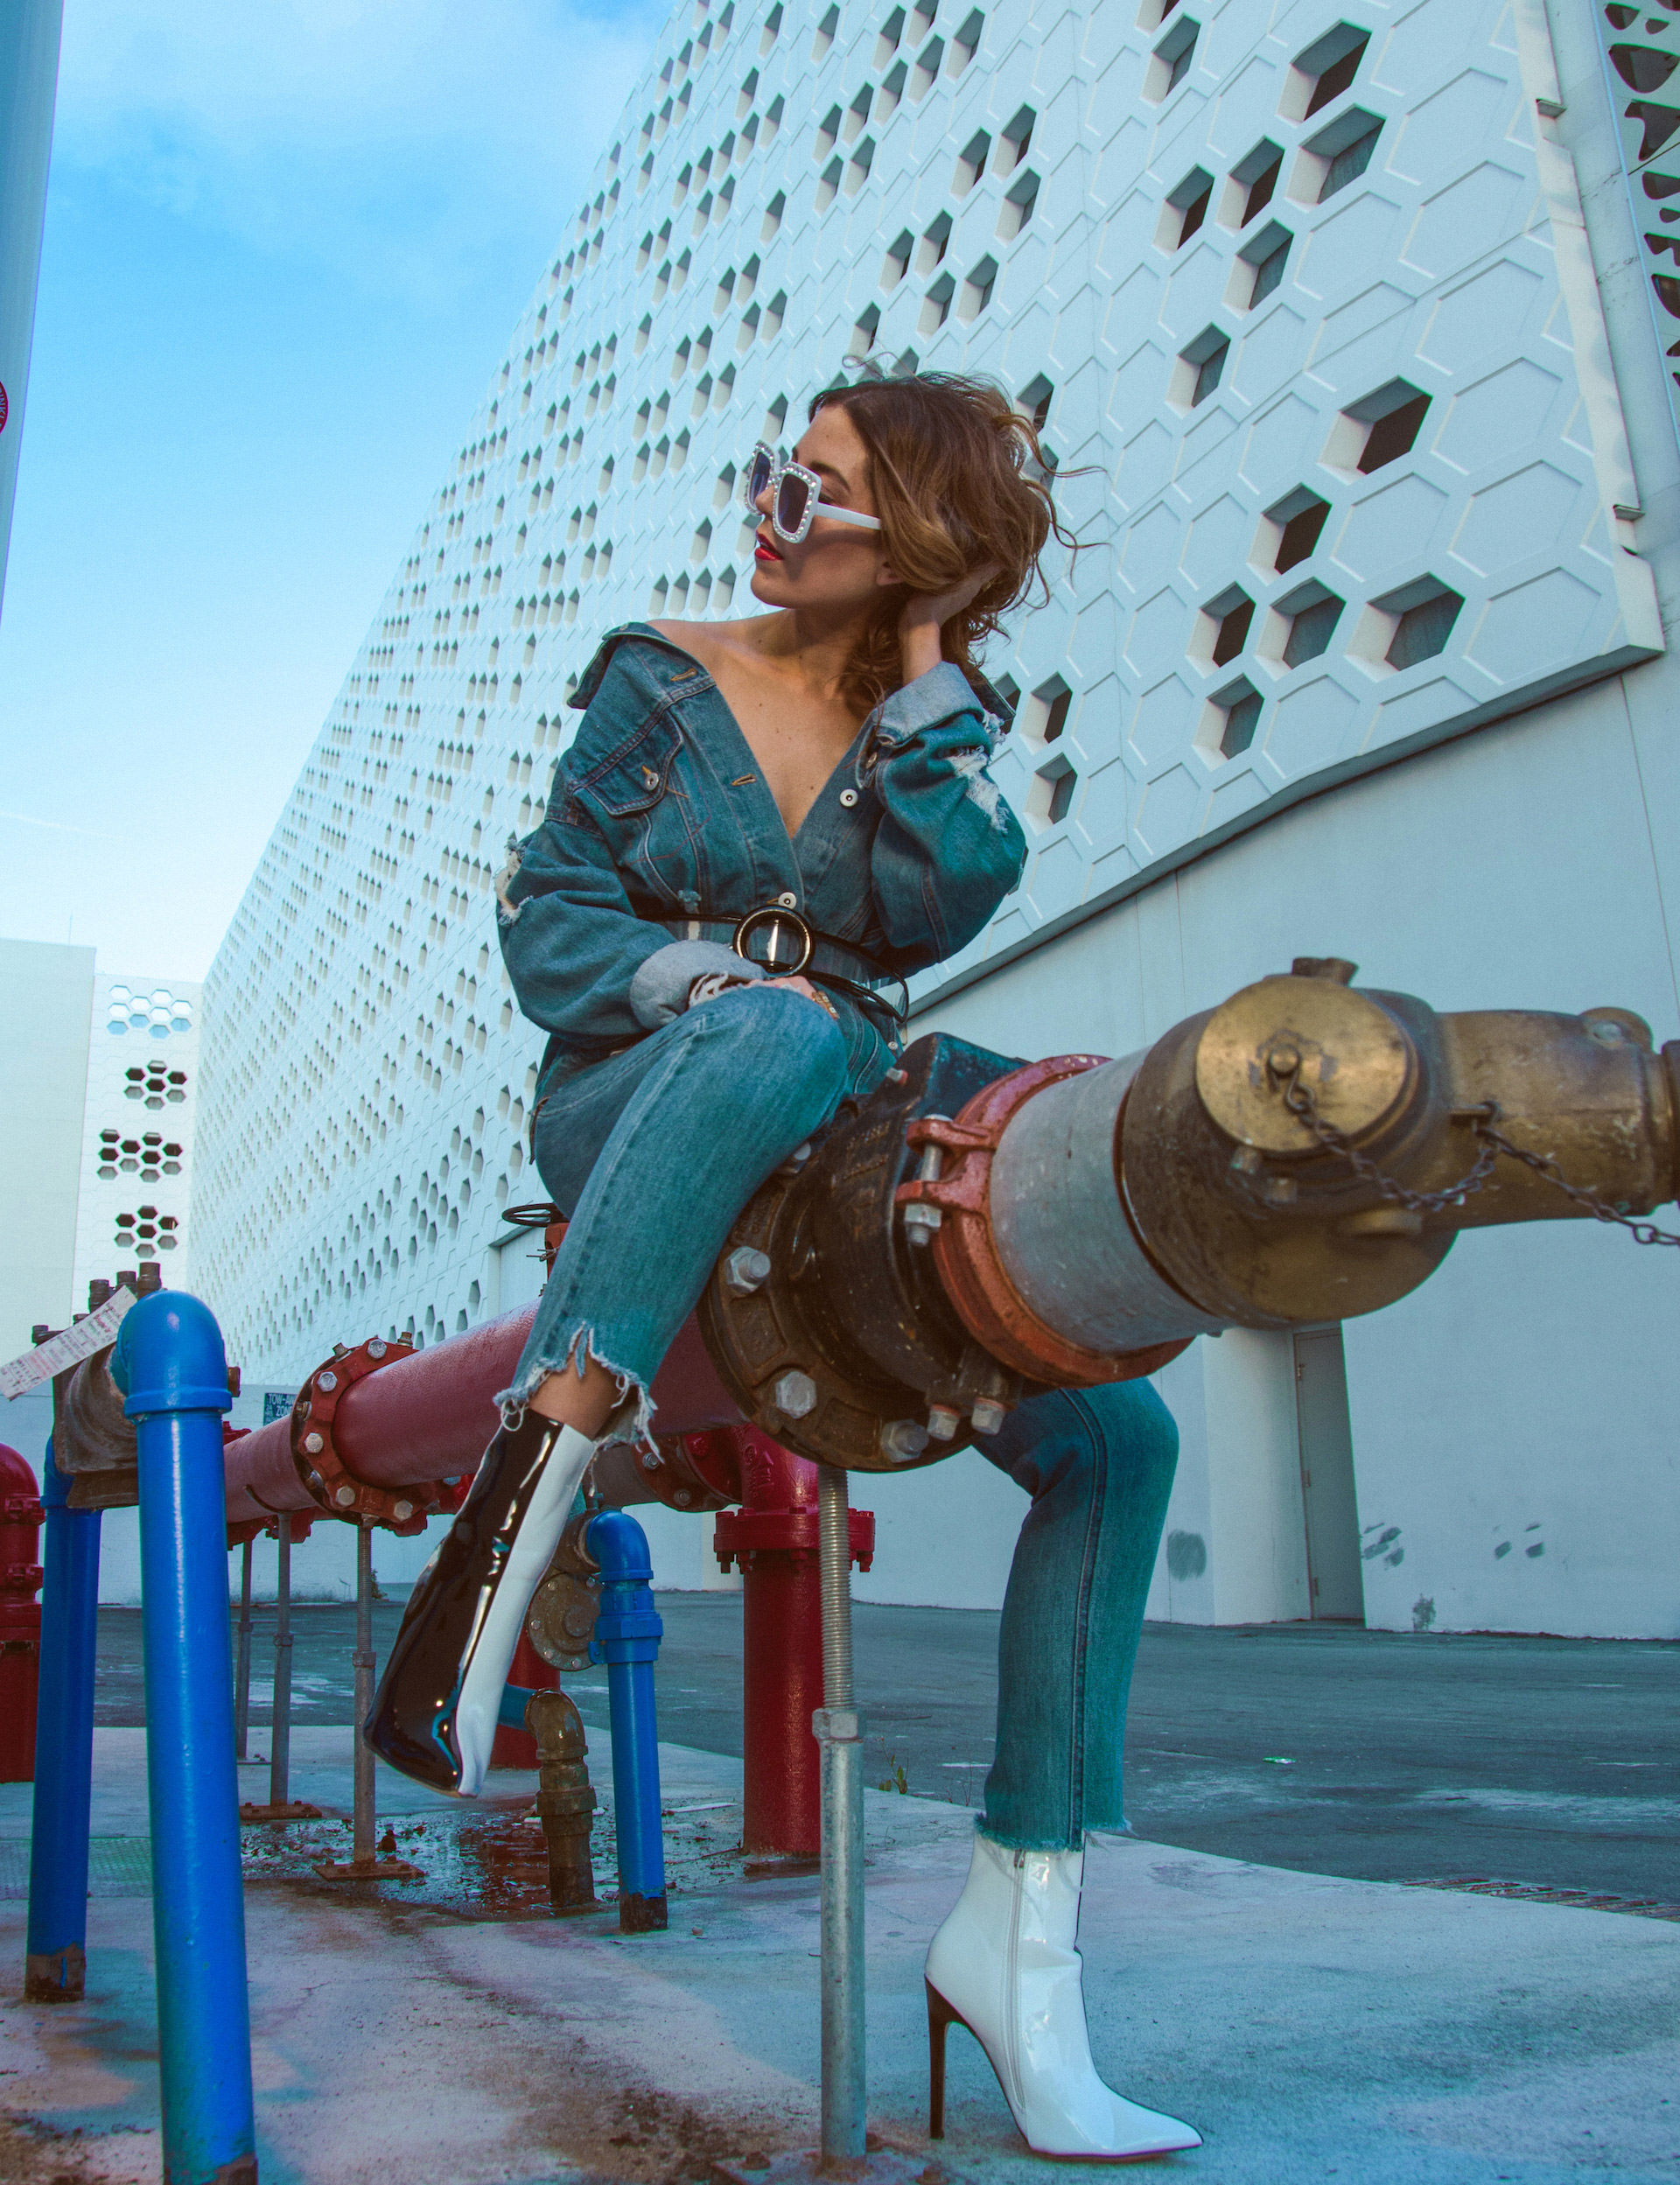 Gabriela Media from Styled by GM at the Miami Design District